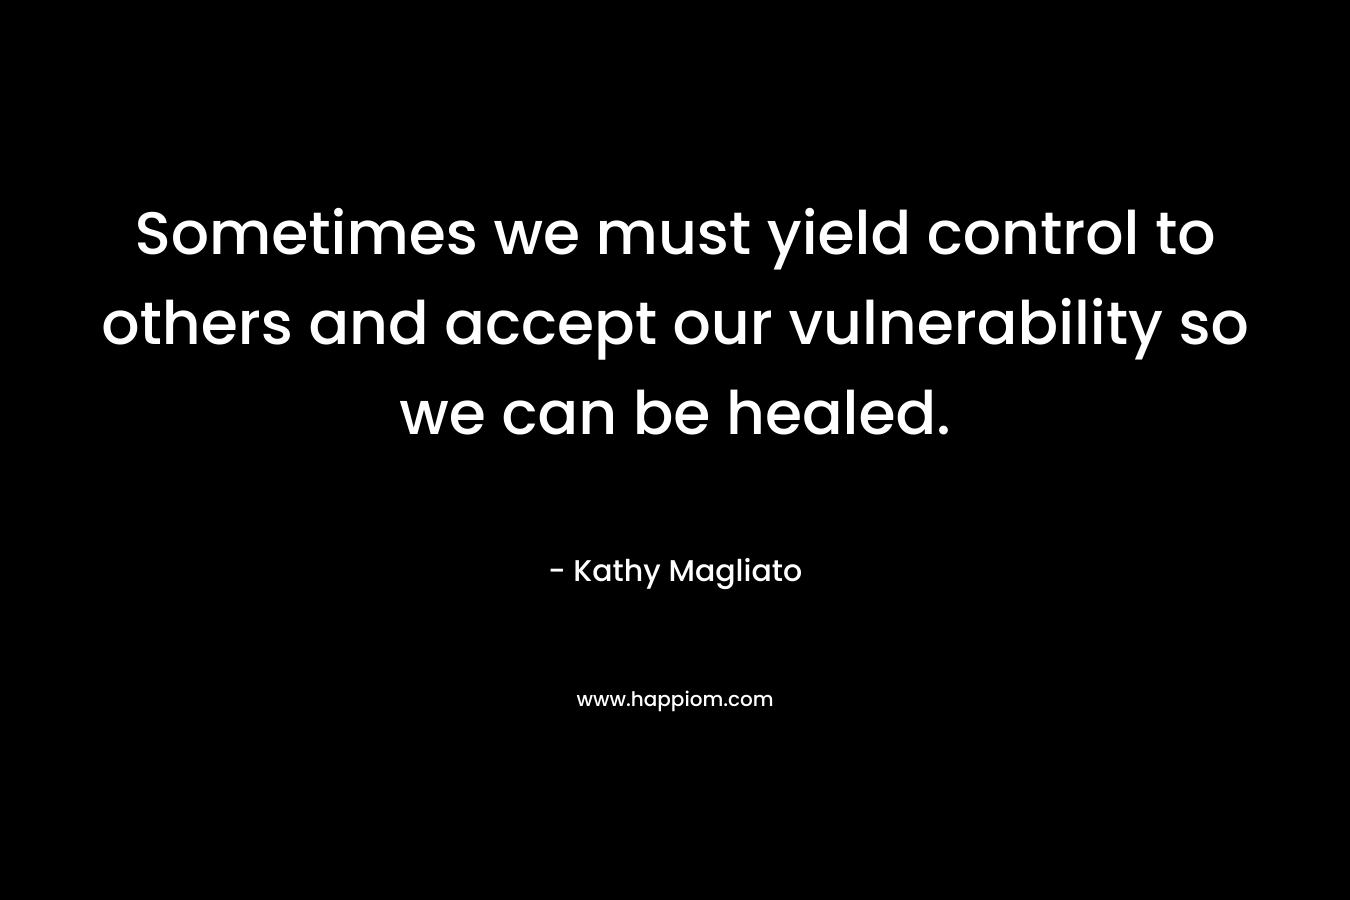 Sometimes we must yield control to others and accept our vulnerability so we can be healed. – Kathy Magliato